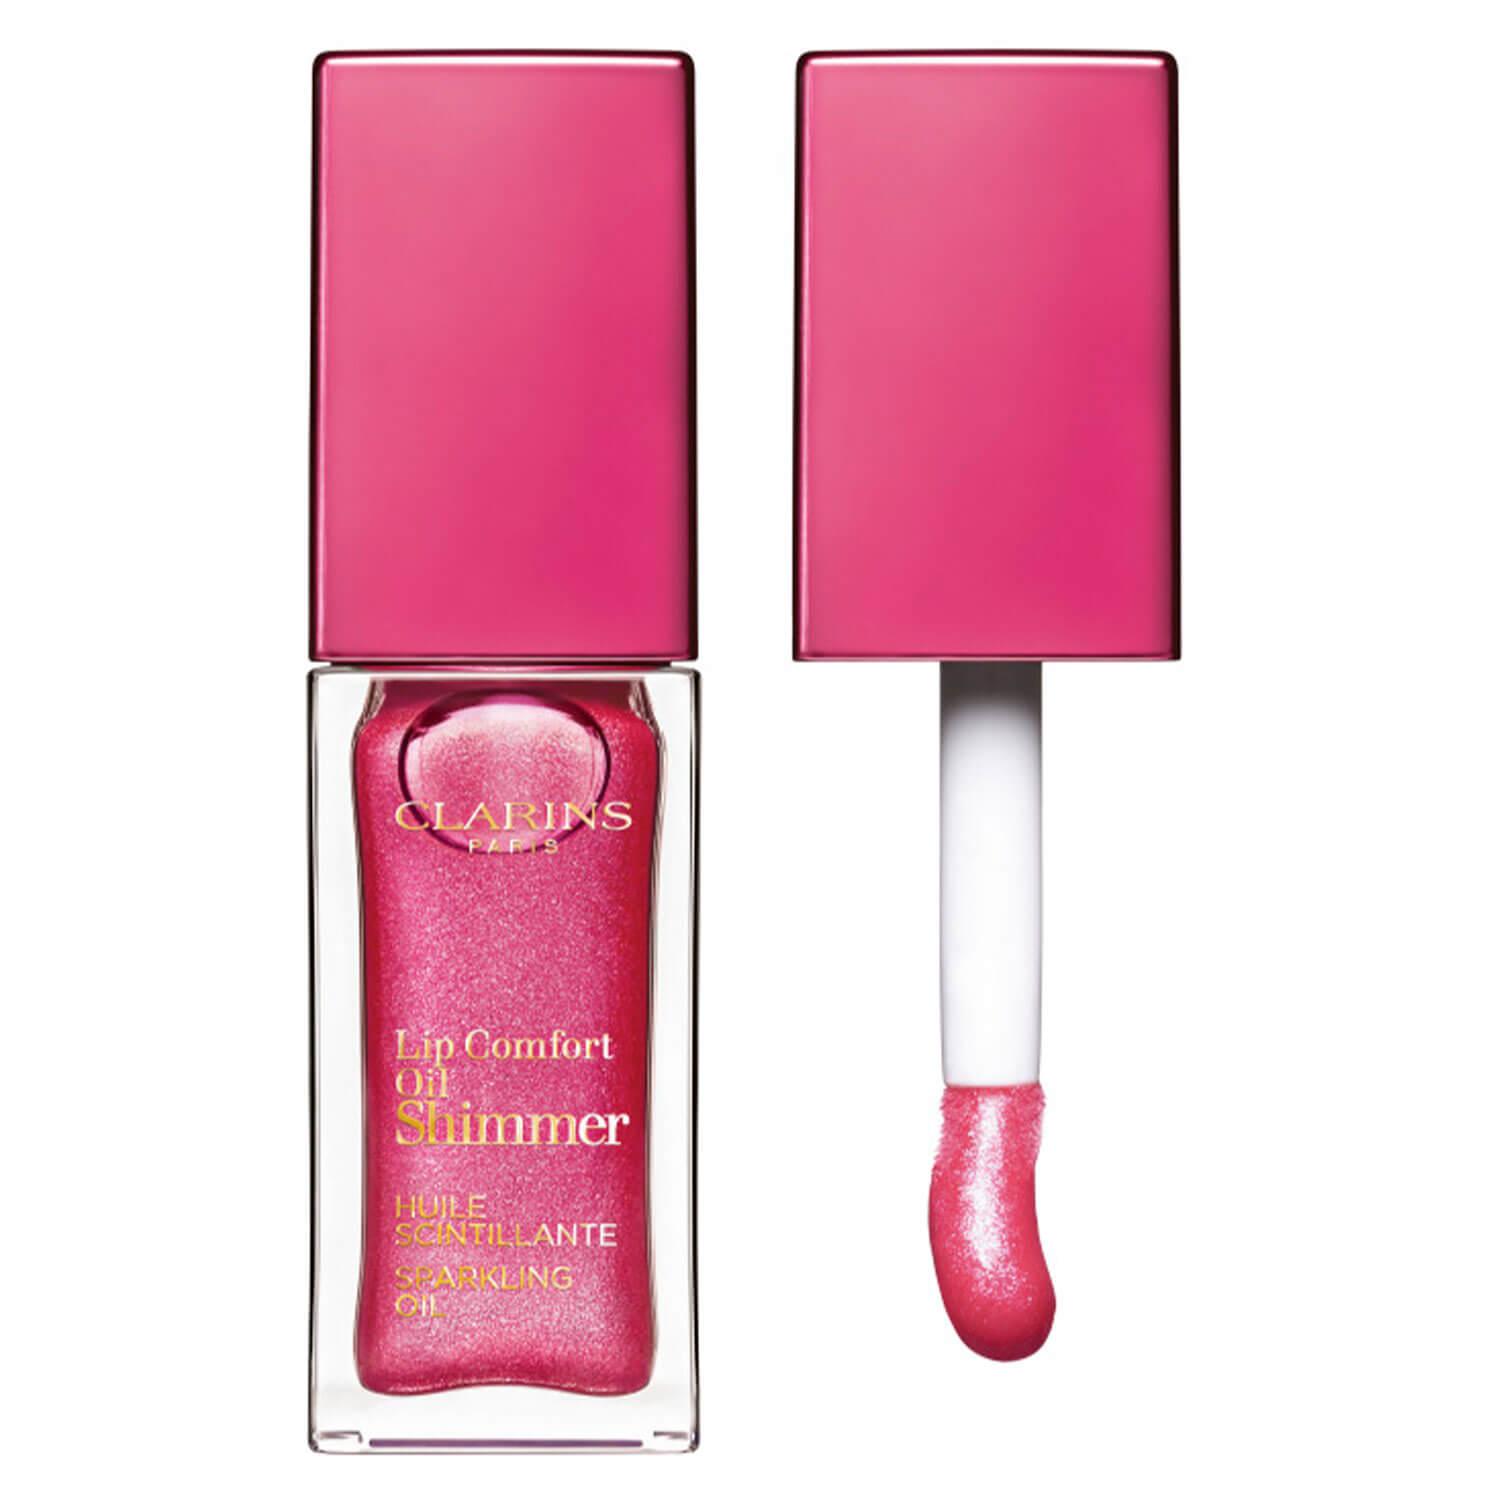 Lip Comfort Oil - Shimmer Pretty In Pink 05